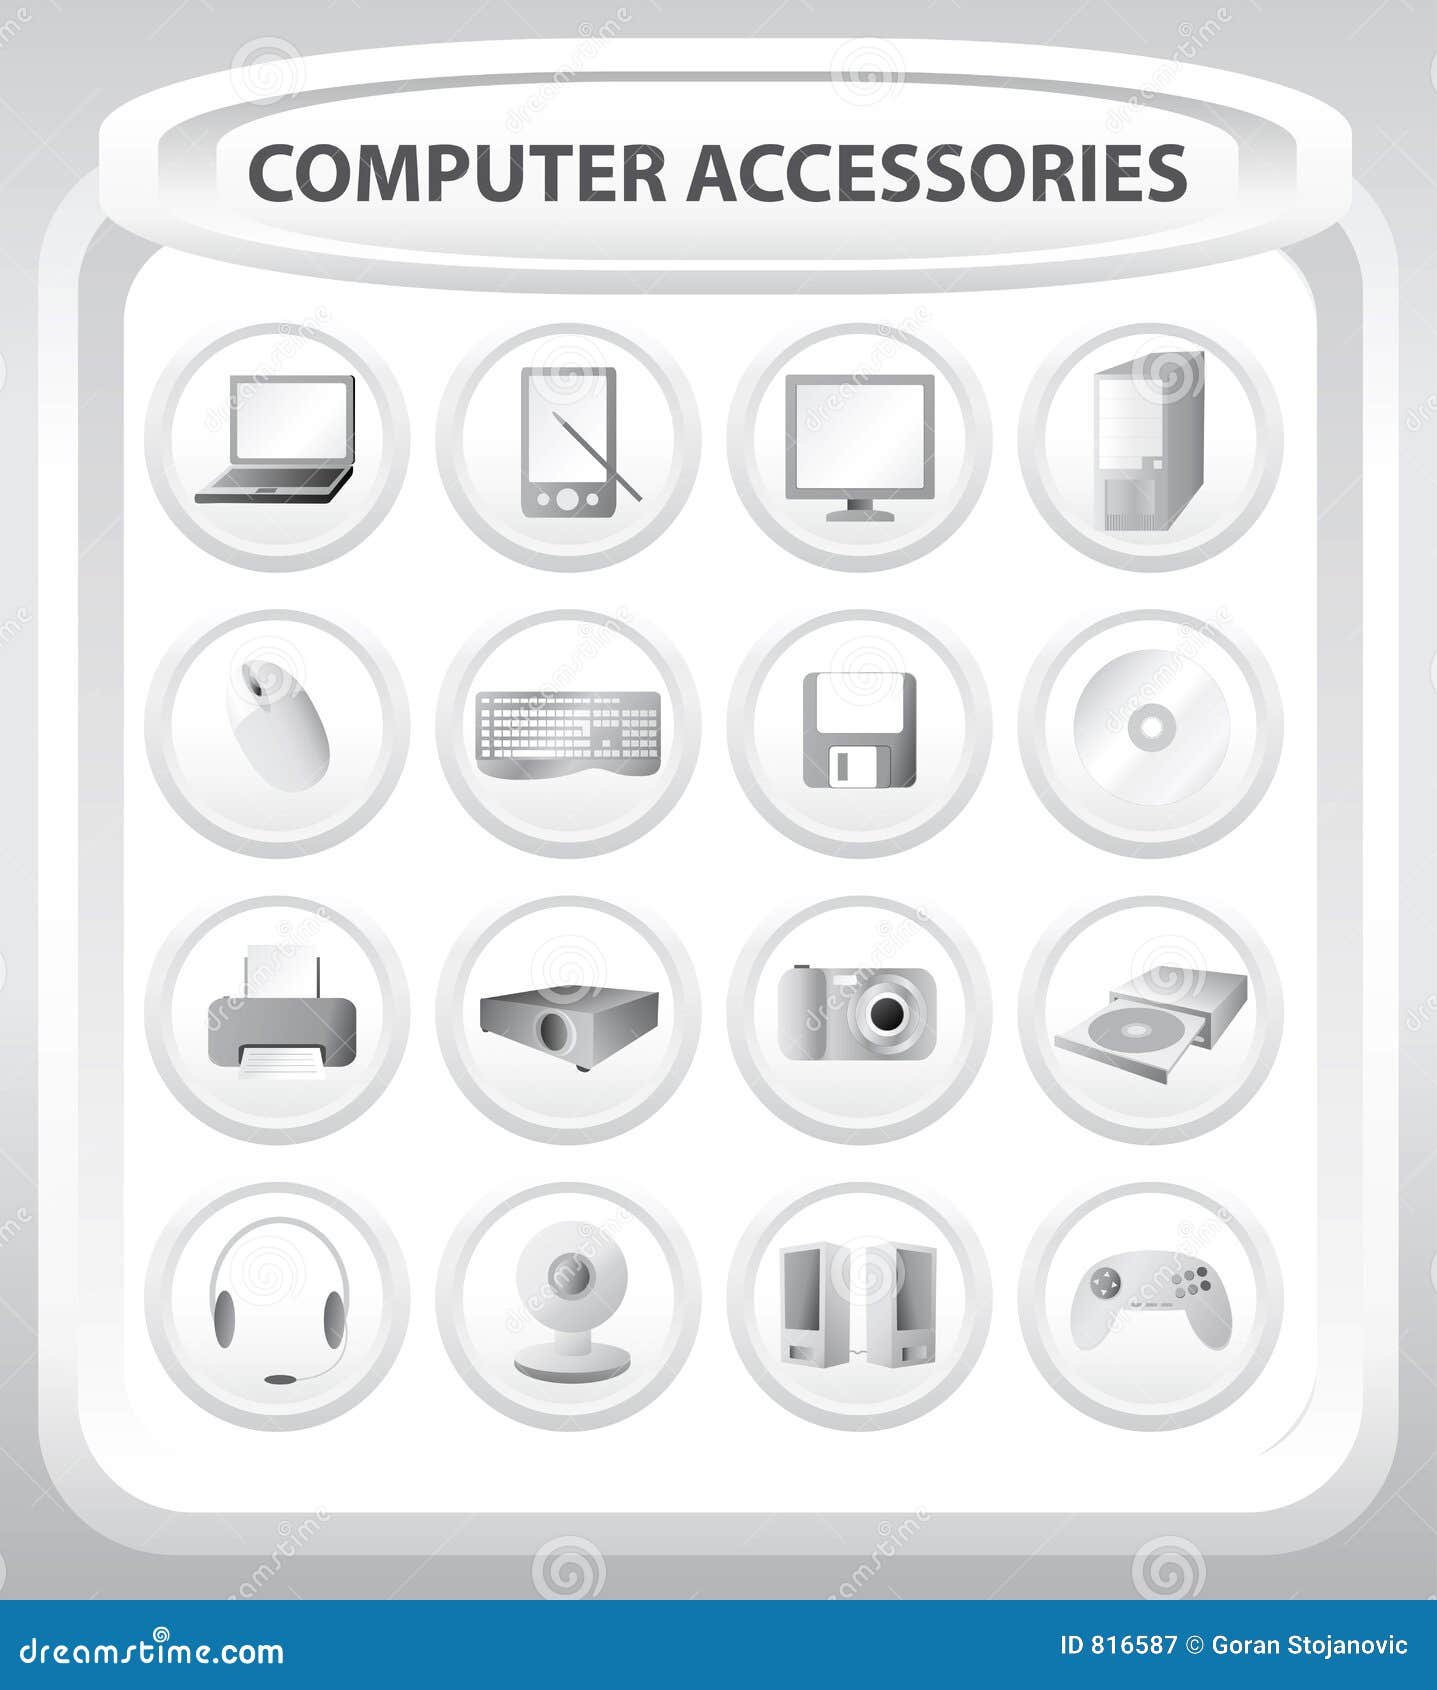 Computer accessories - vector. Computer accessories - Illustration. EPS8 file available.